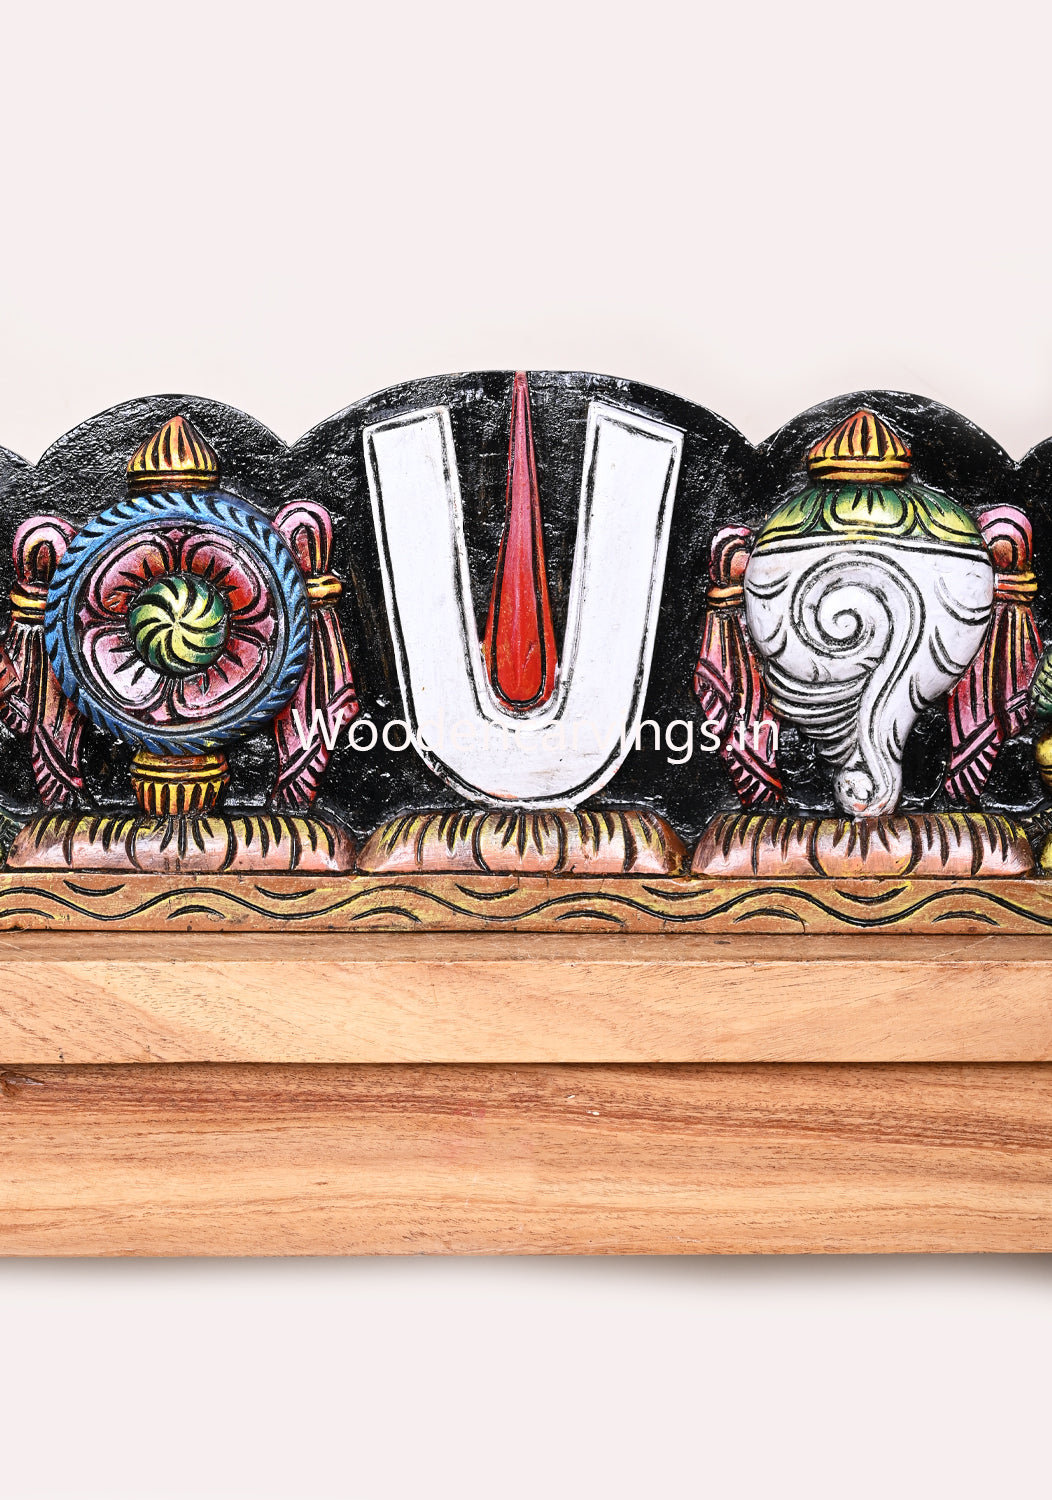 For Your Beautiful Home Entrance Hooks Fixed Wealthy Balaji's Thirunamam Conch and Chakra Wooden Panel 18"